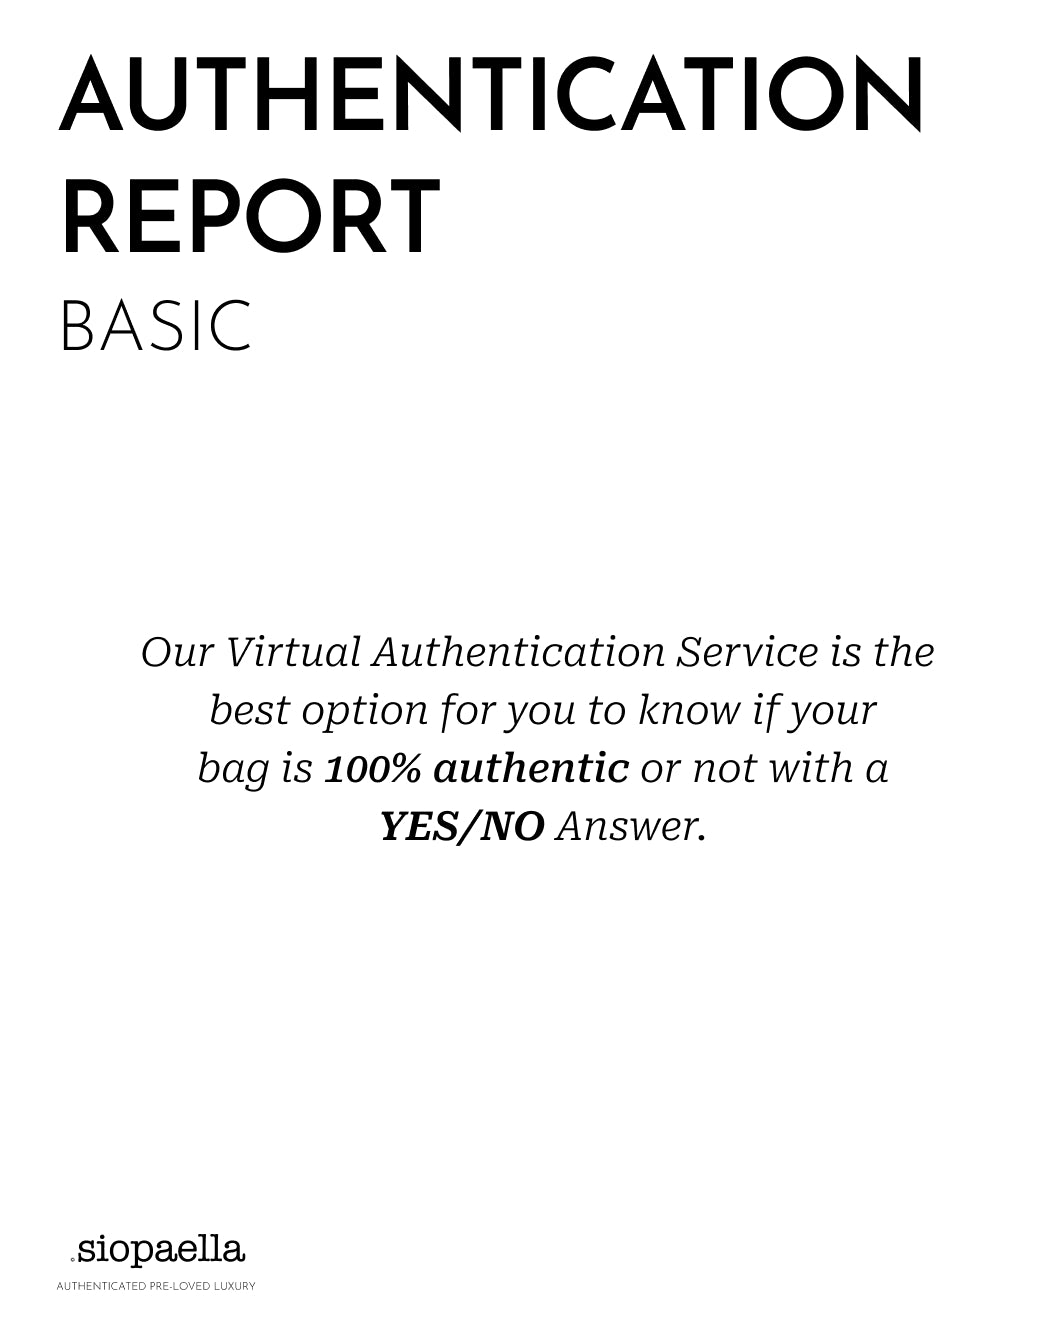 Authenticate This - Basic Report